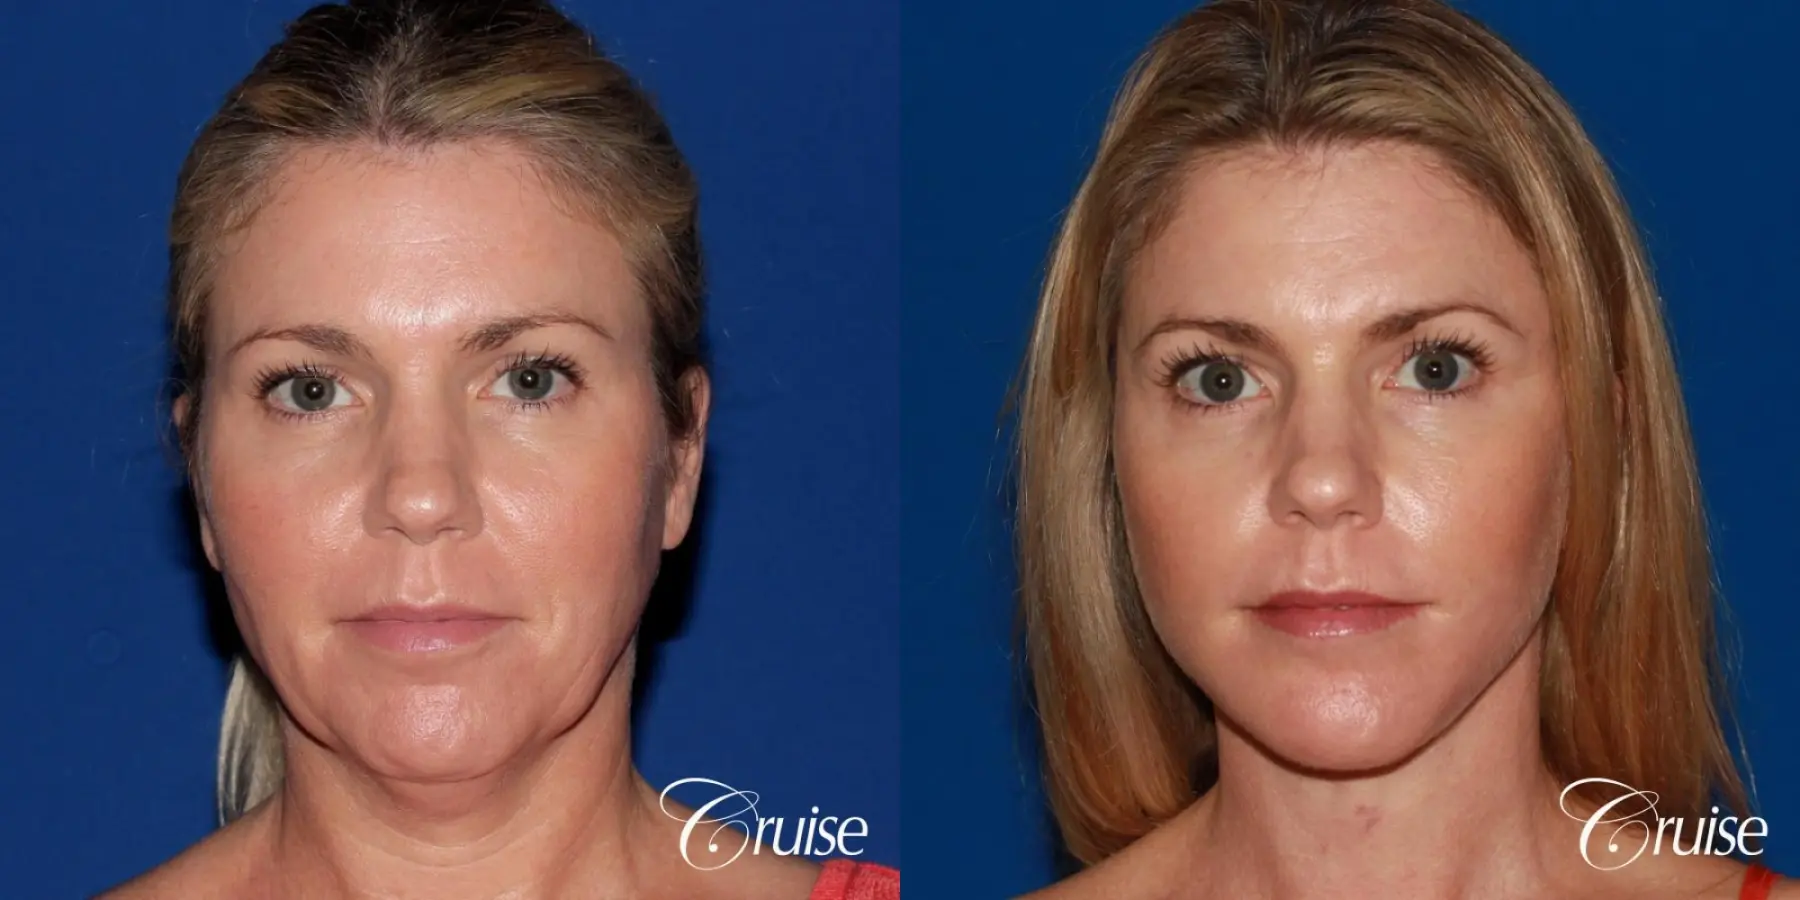 lower facelift with chin liposuction - Before and After